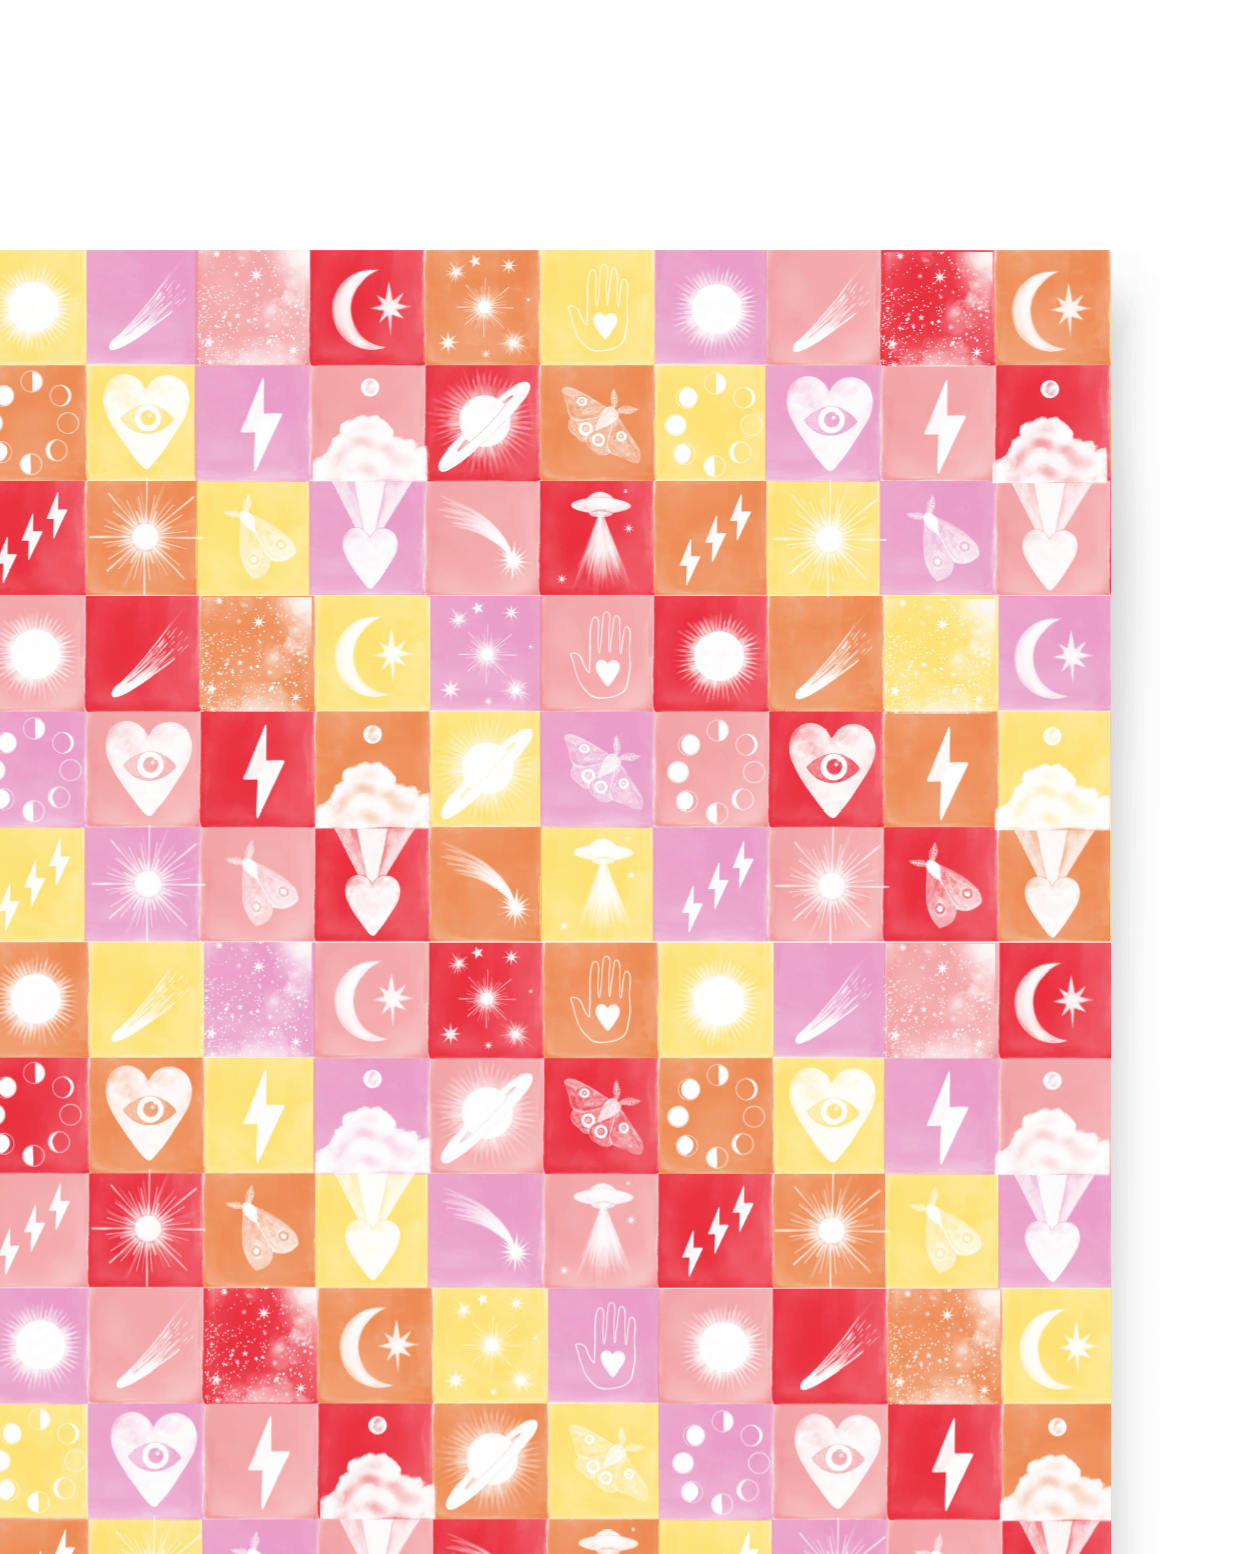 Single sheet of Summer Checkerboard gift wrap. Pink, purple, orange, yellow squares with neon icons of UFOs, hearts with eyes, moths, moons with stars, Saturn, shooting stars, moon phases, lightning bolts, moths, Hamsa hands, and a brightly burning star.